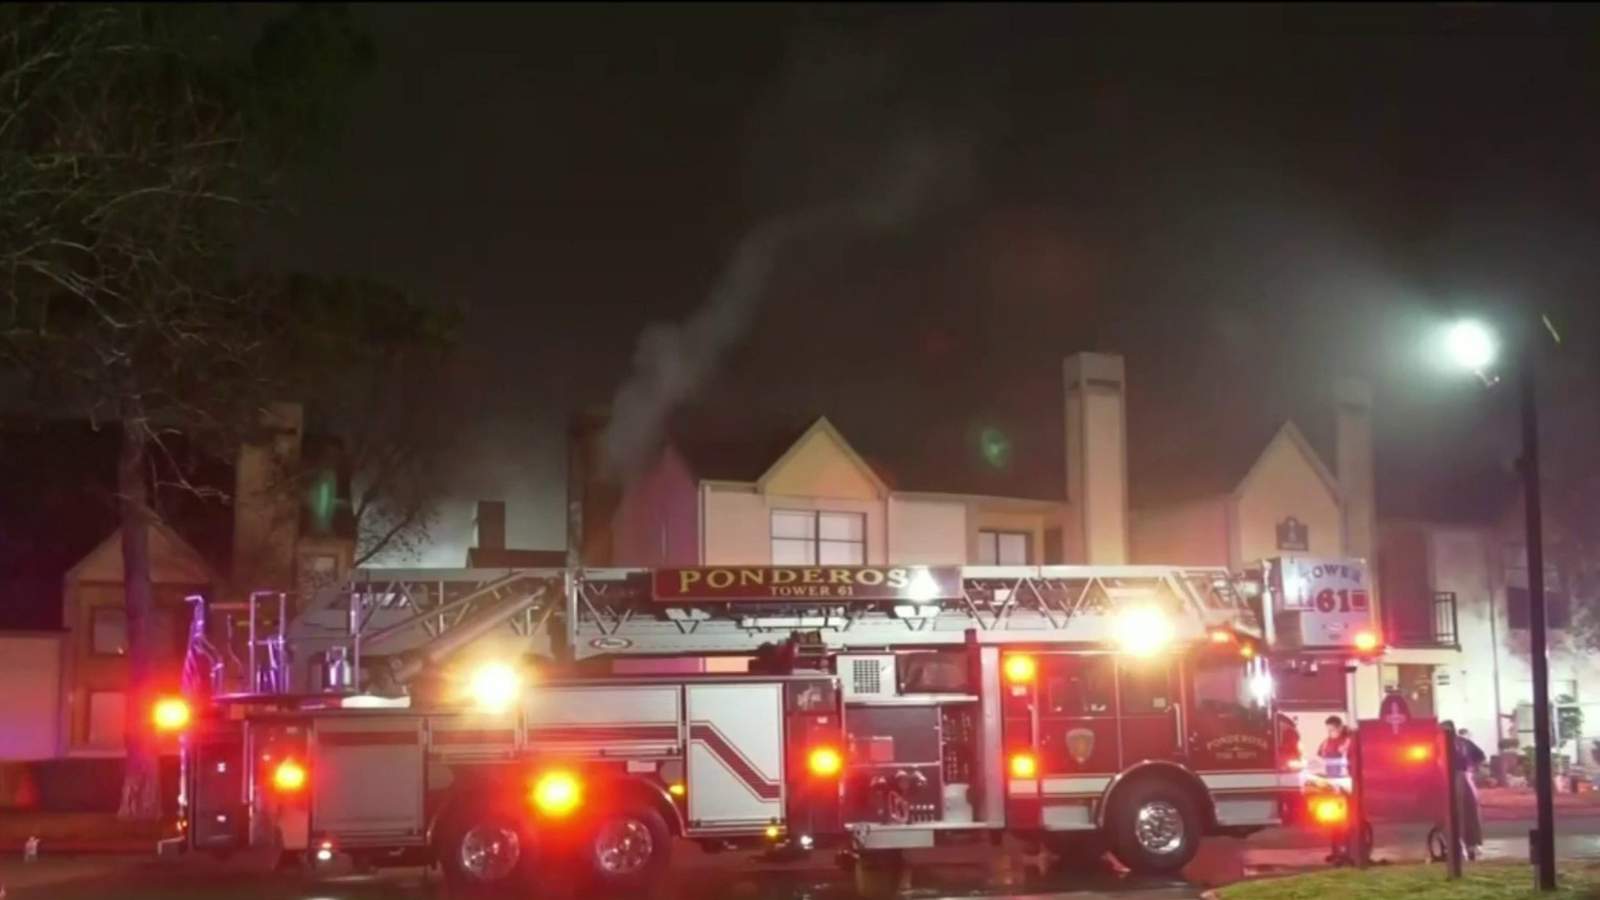 2 deputies, 1 firefighter injured in North Harris County apartment fire, officials say